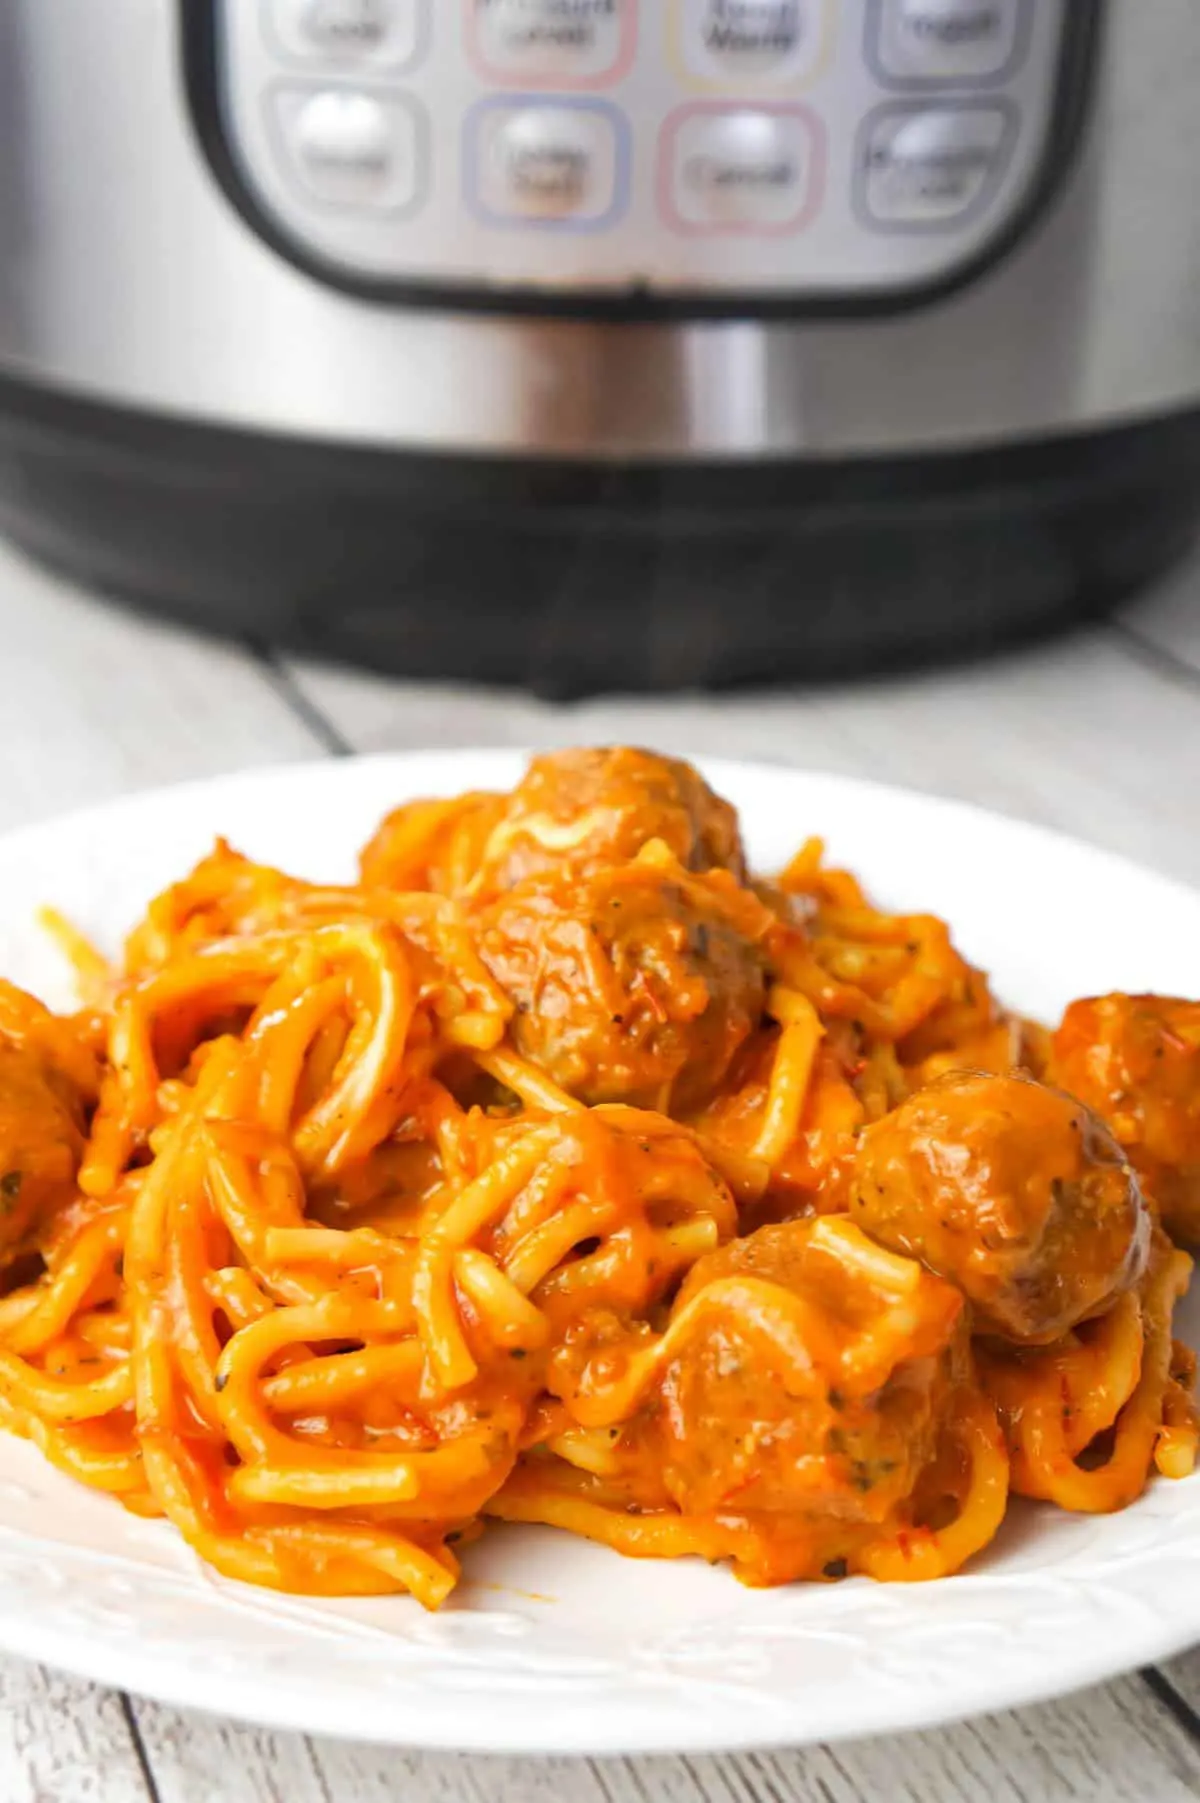 Instant Pot Cheesy Spaghetti and Meatballs is an easy and delicious pressure cooker pasta recipe loaded with Italian meatballs, shredded mozzarella and cheddar cheese and marinara sauce.